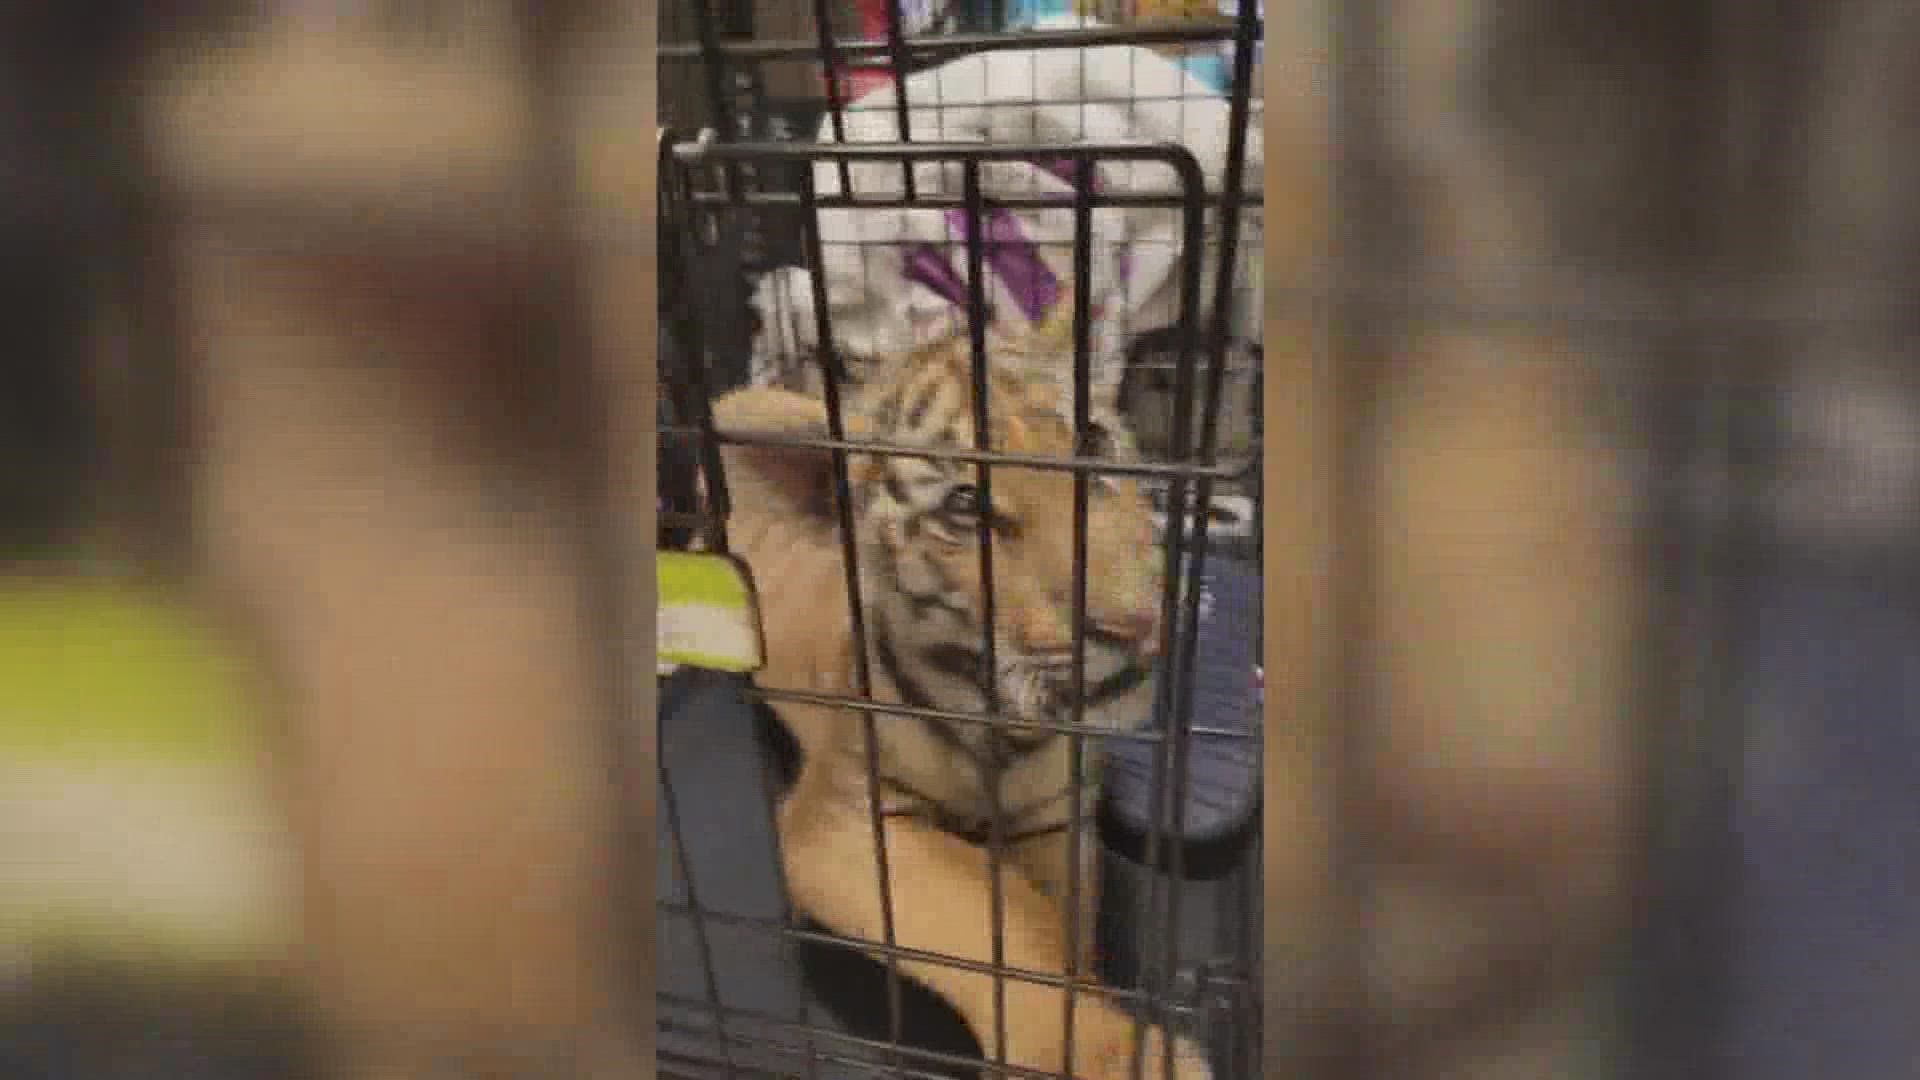 Authorities say a Phoenix man has been arrested after he allegedly offered to sell a tiger cub to undercover police officers for $20,000.